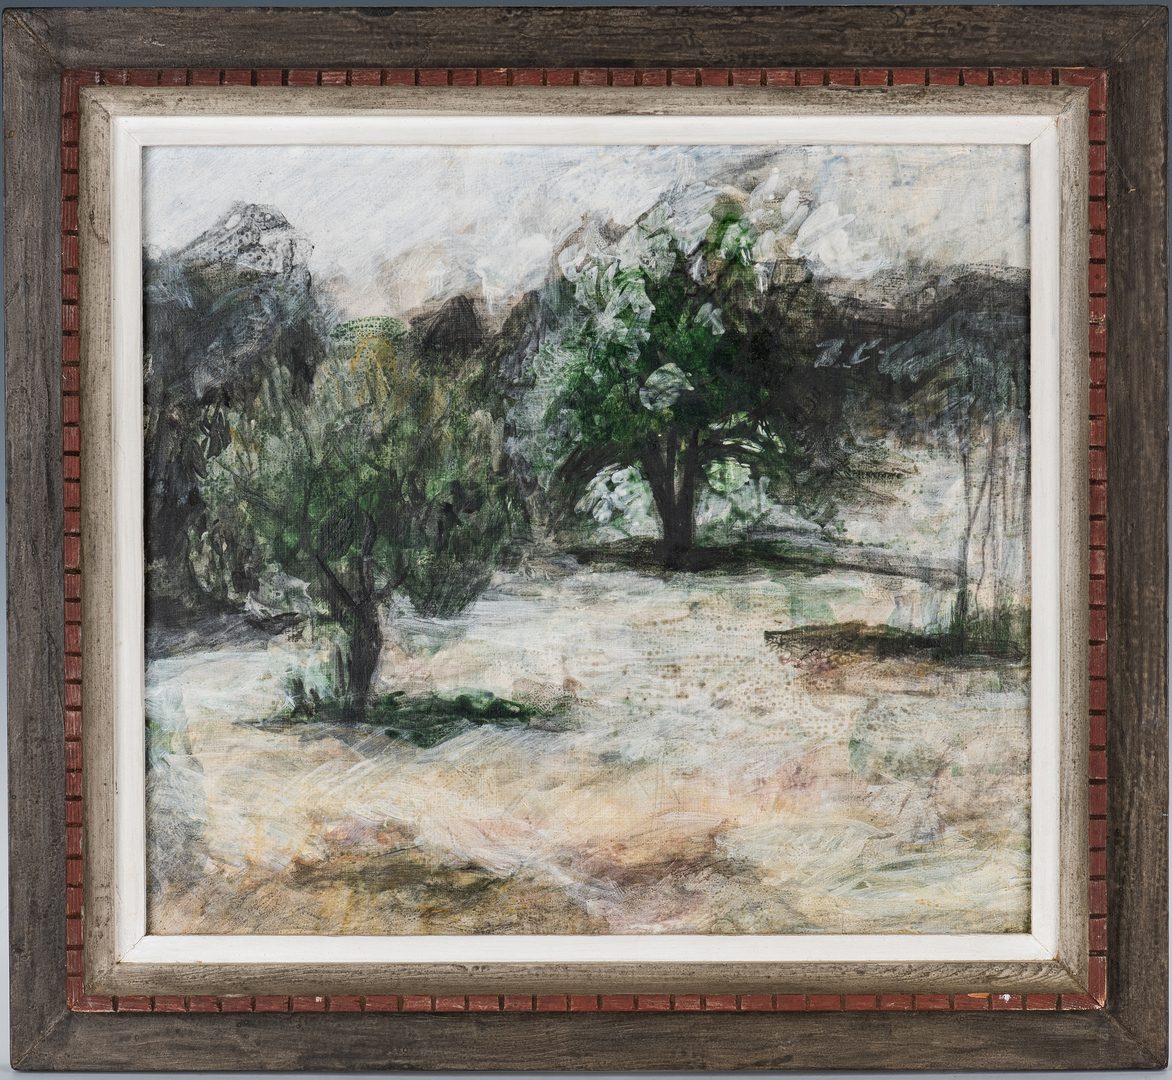 Lot 126: Joanna Higgs Ross Landscape, "Green and White Orchard"